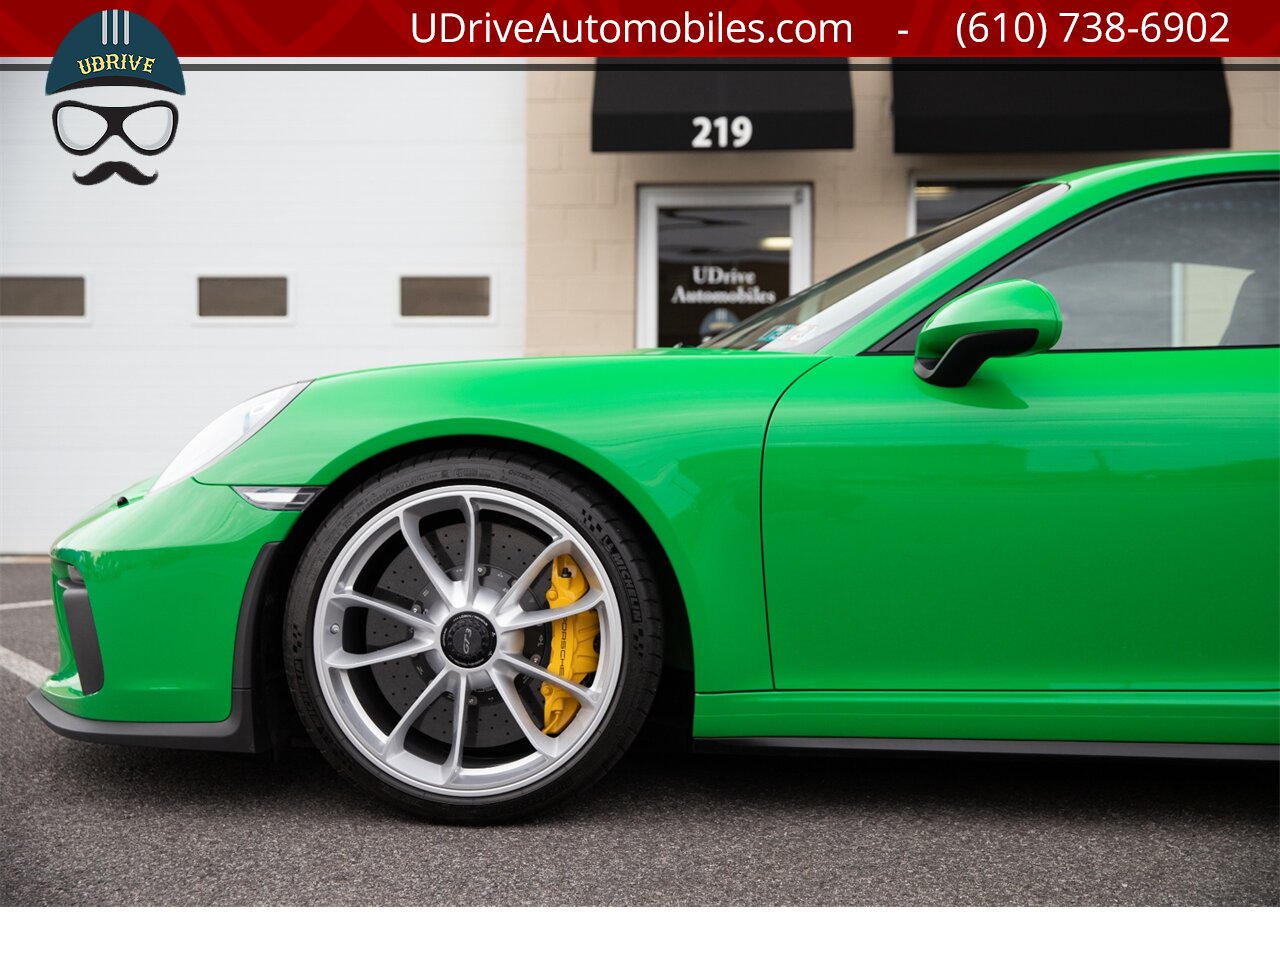 2018 Porsche 911 GT3 6 Speed Paint To Sample Viper Green 48 Miles  Front Axle Lift PCCB Carbon Bucket Seats - Photo 8 - West Chester, PA 19382